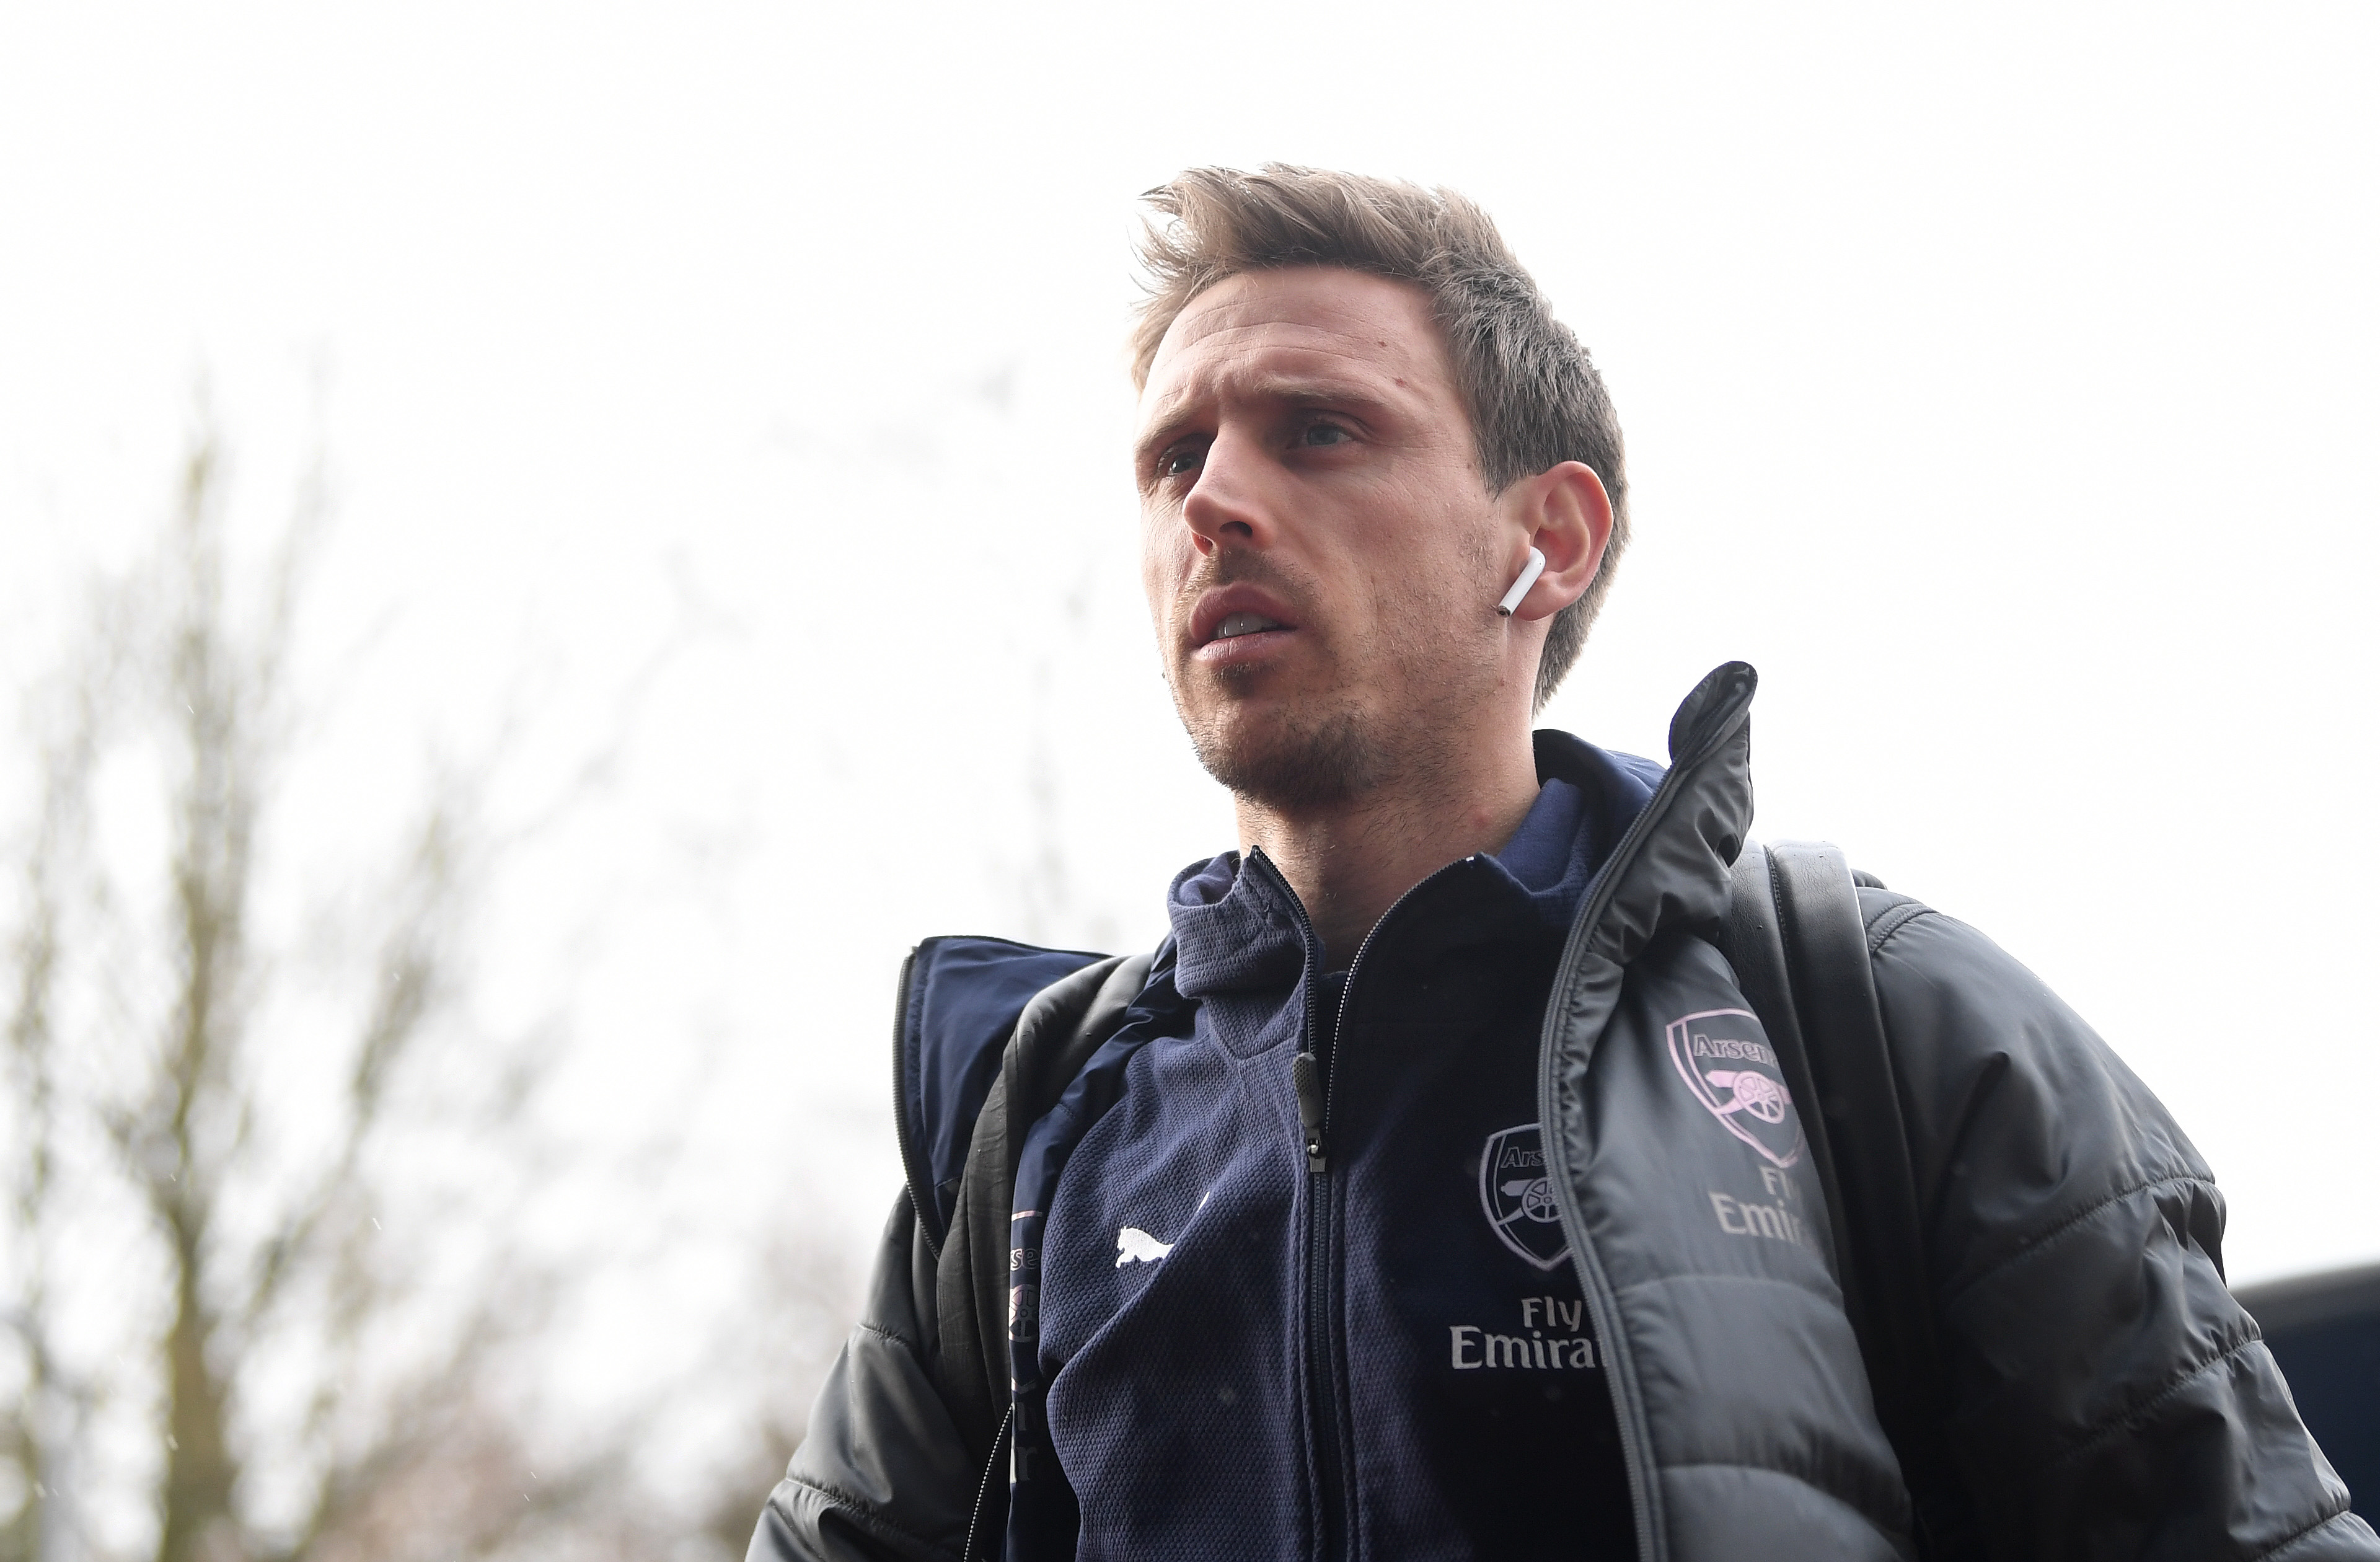 HUDDERSFIELD, ENGLAND - FEBRUARY 09:  Nacho Monreal of Arsenal arrives at the stadium prior to the Premier League match between Huddersfield Town and Arsenal FC at John Smith's Stadium on February 9, 2019 in Huddersfield, United Kingdom.  (Photo by Gareth Copley/Getty Images)